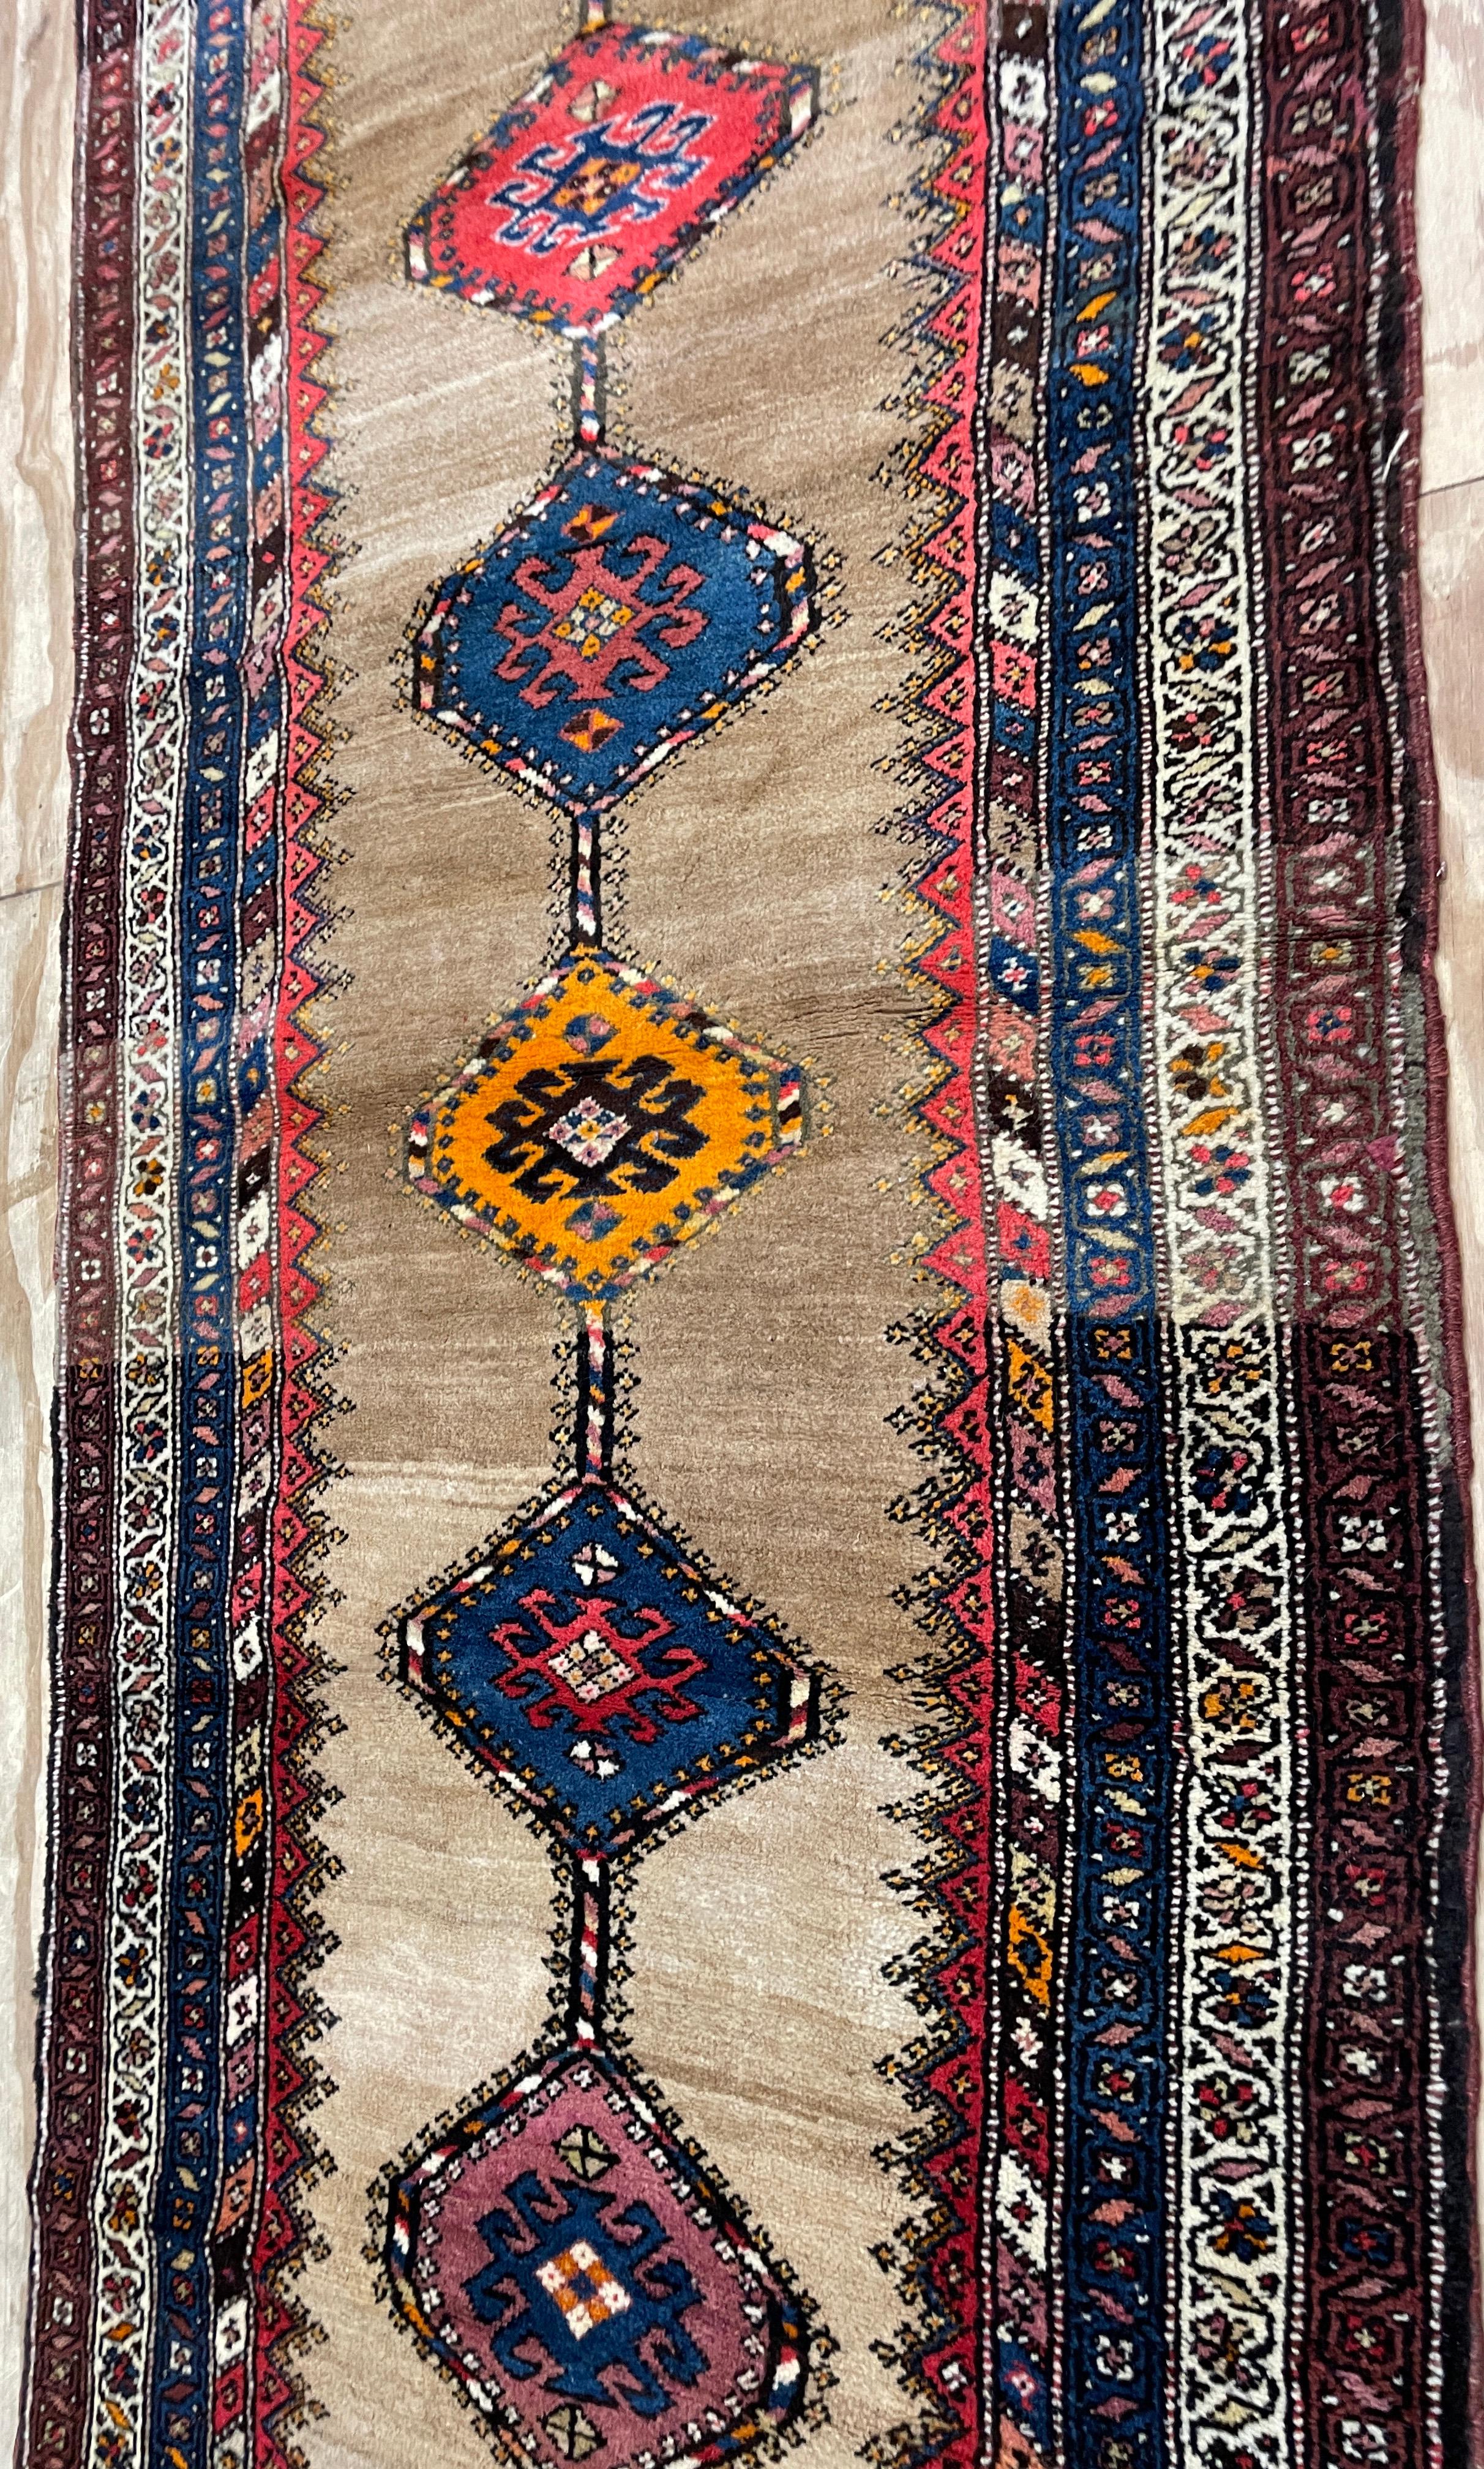 Discover the timeless allure of this exquisite antique Northwest Persian Serab/Serapi runner! Measuring at 3'2